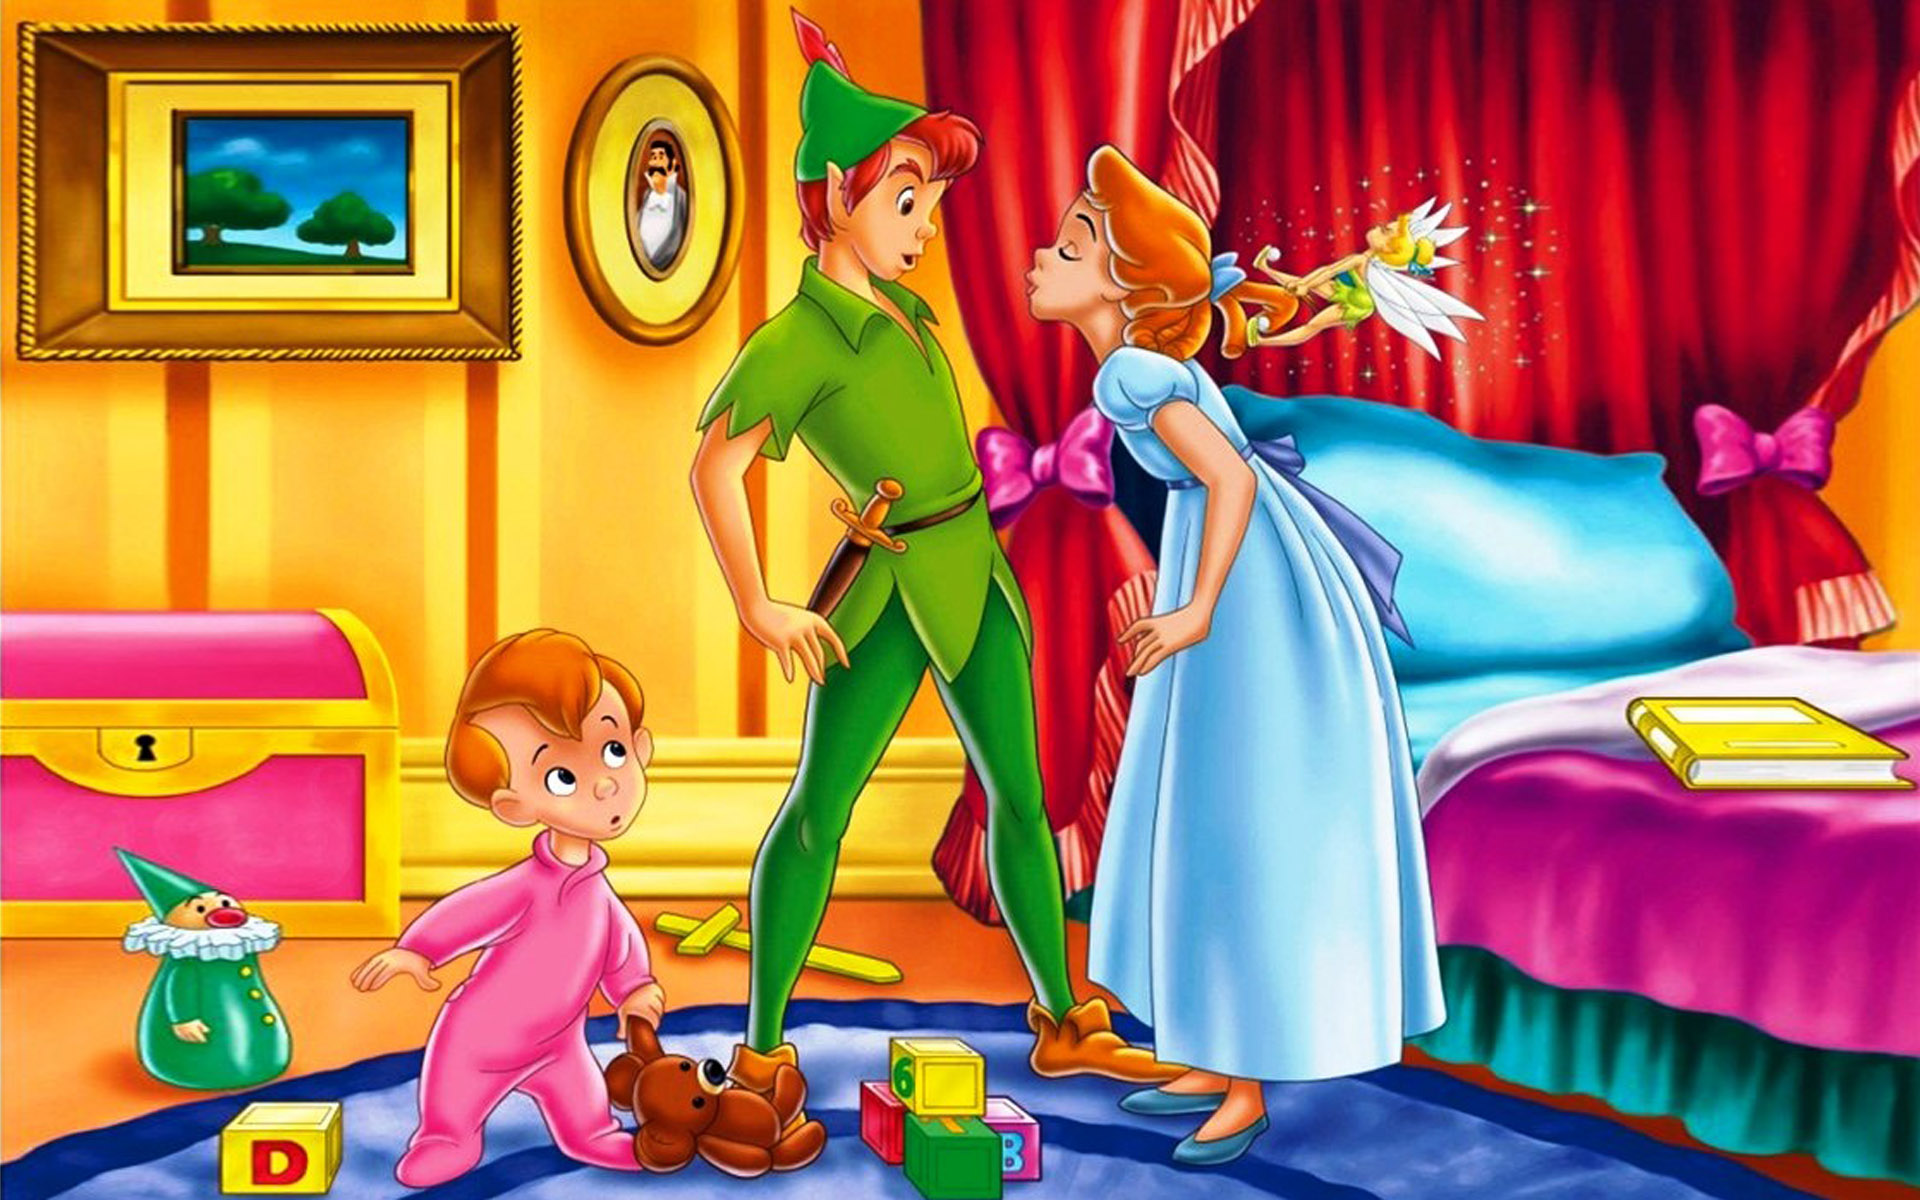 Peter Pan With Wendy Darling And Michael Darling Disney Images Free